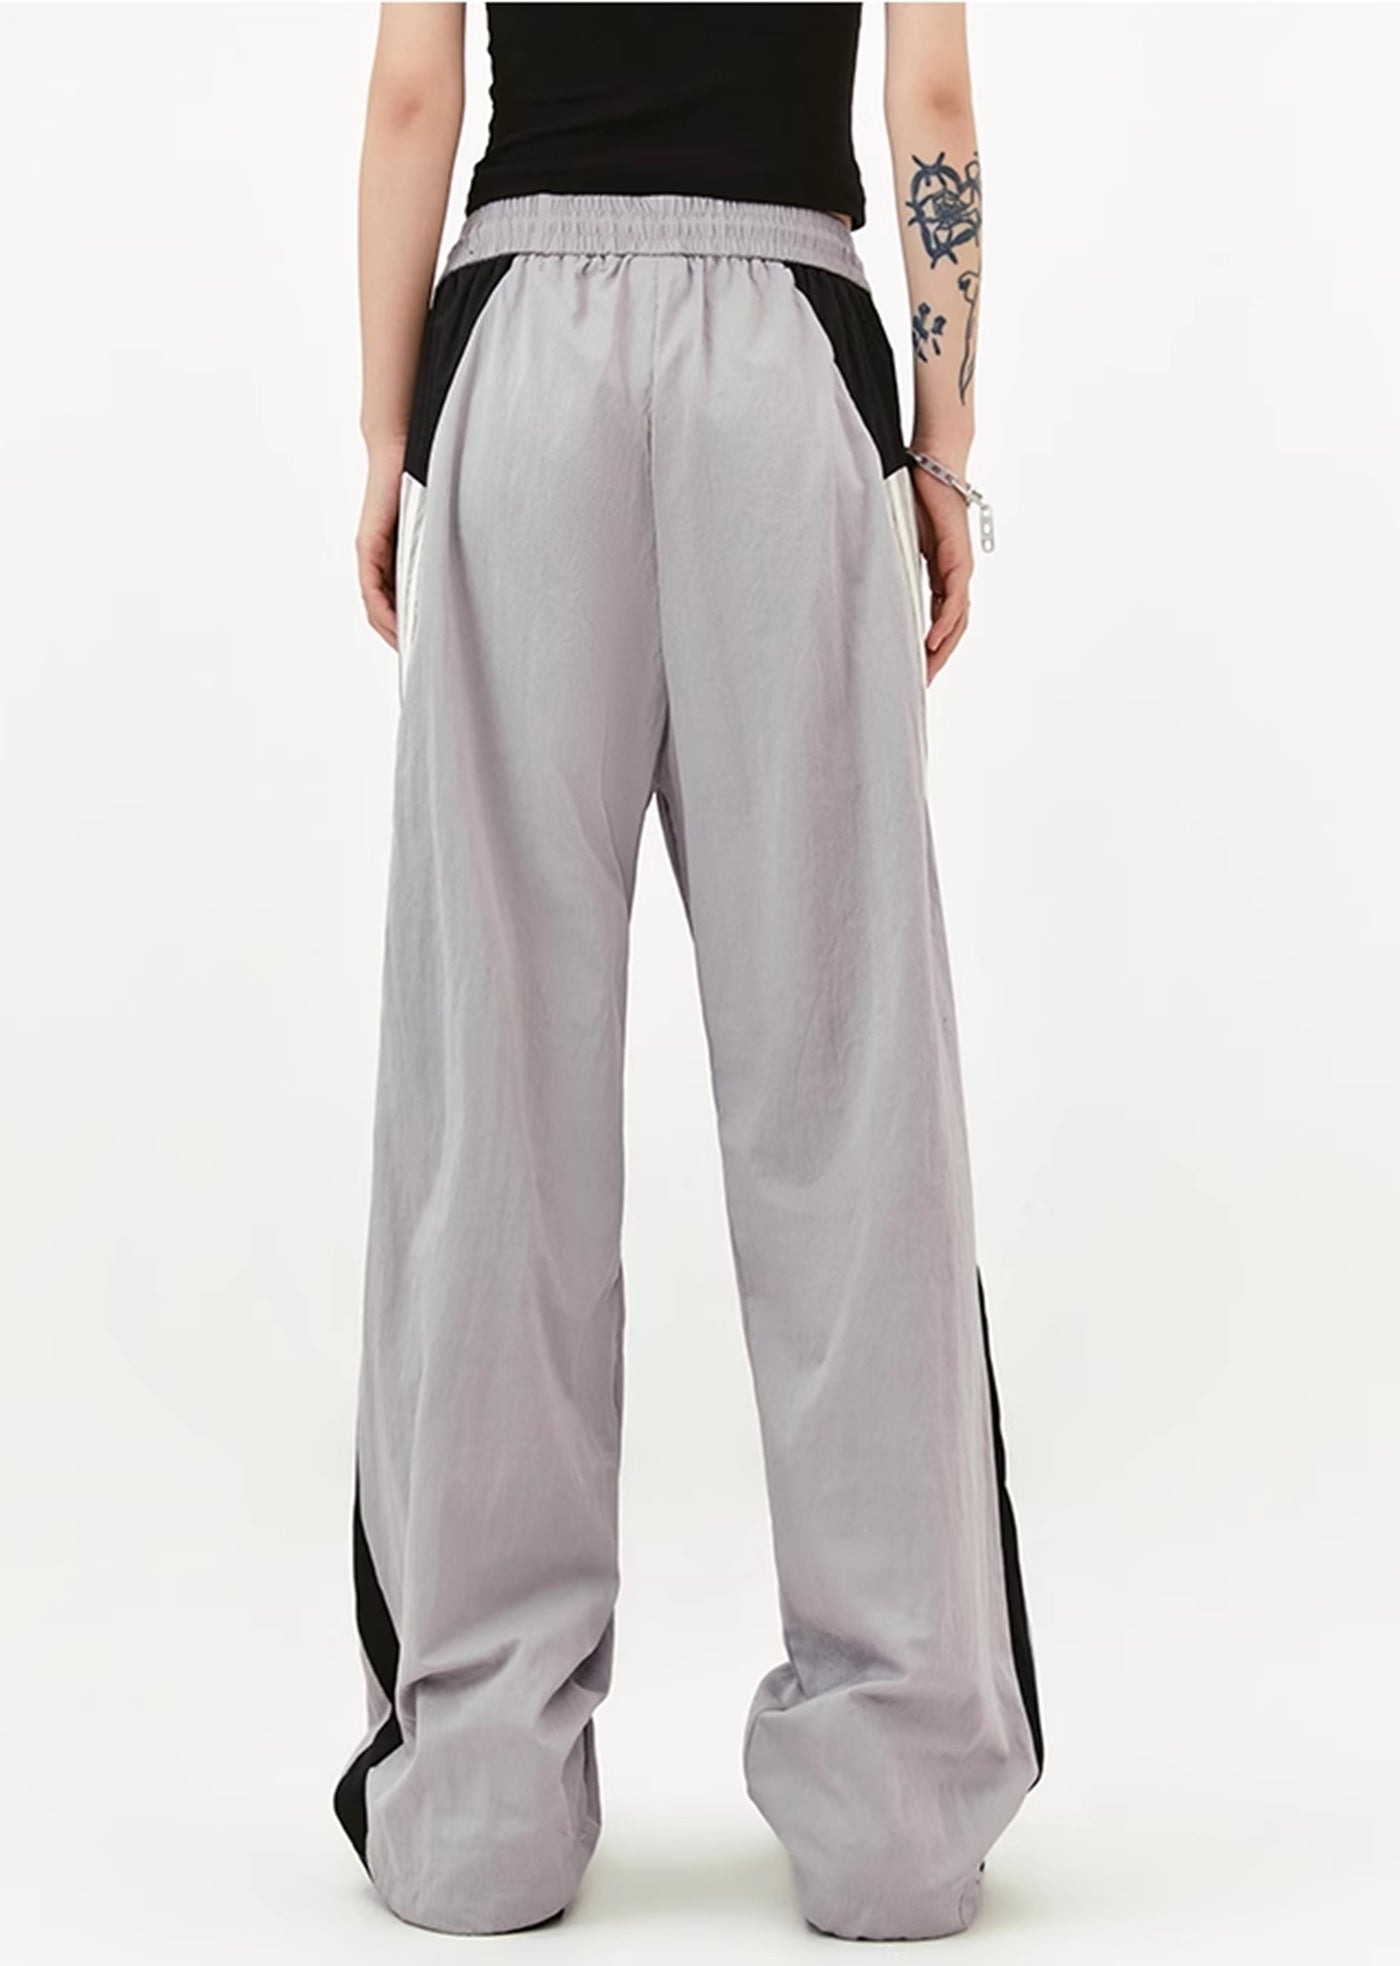 【MADEEXTREME】Sideline sporty casual design wide pants  MT0002